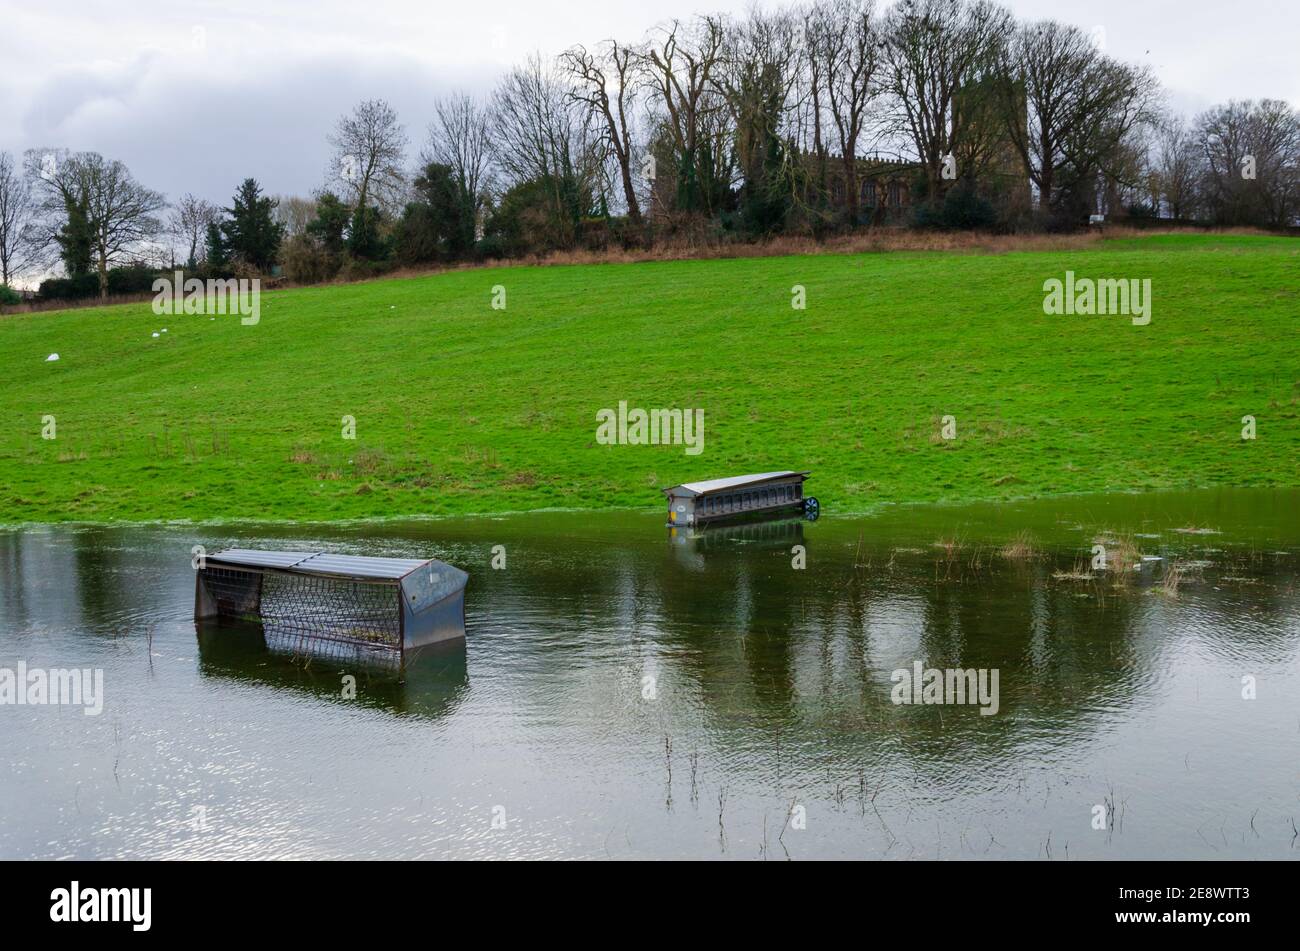 Mold, Flintshire; UK: Jan 28, 2021: Sheep feeders have been partially submerged in a field which has been badly flooded during the recent heavy rainfa Stock Photo